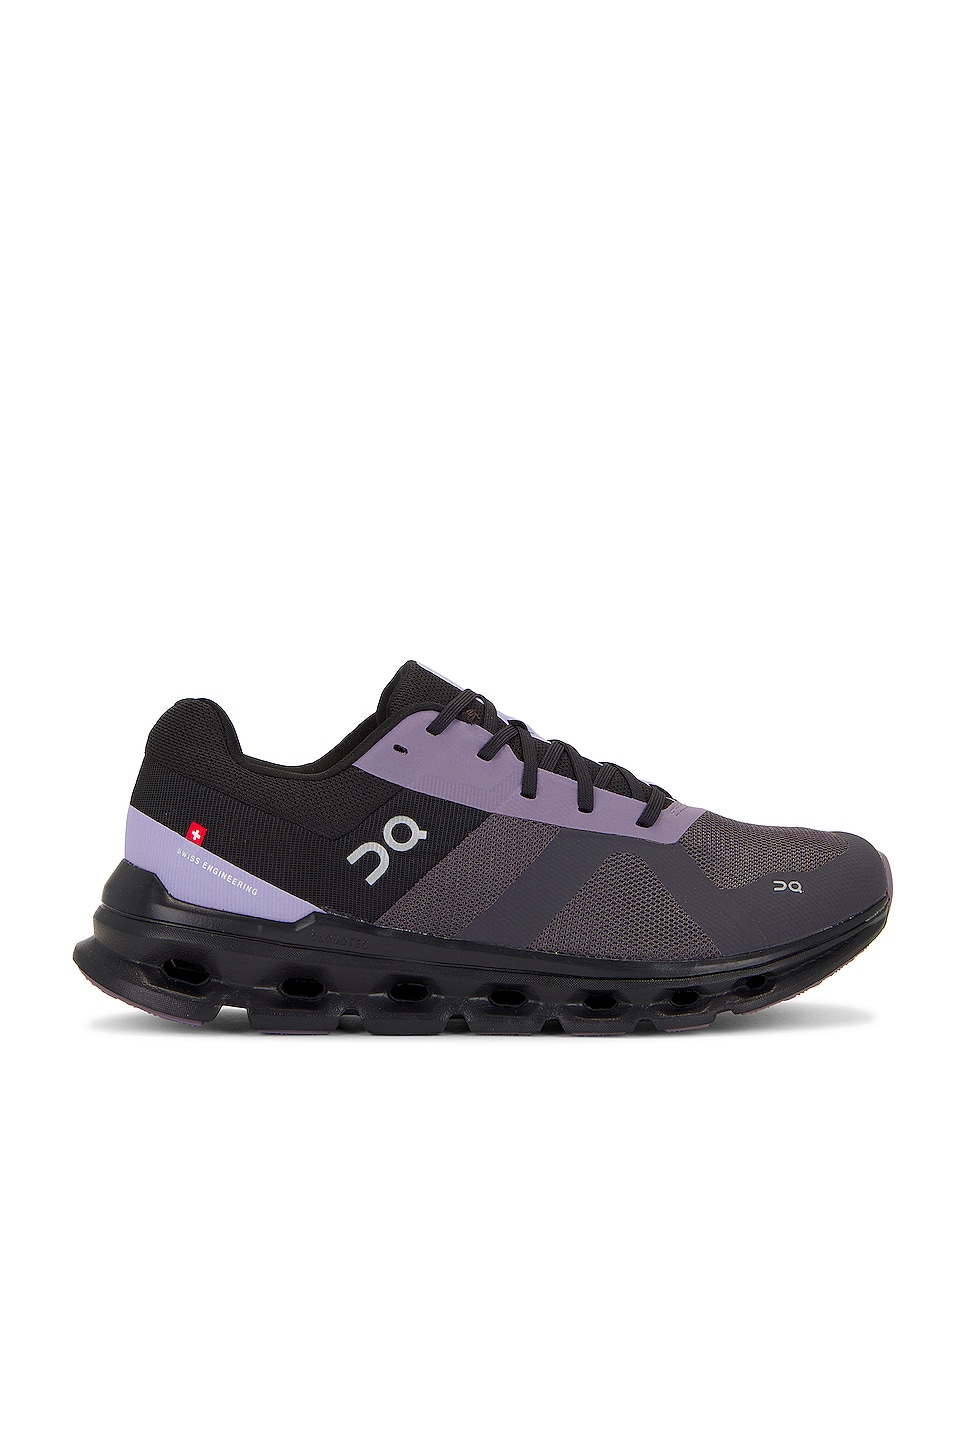 Image 1 of On Cloudrunner in Iron | Black